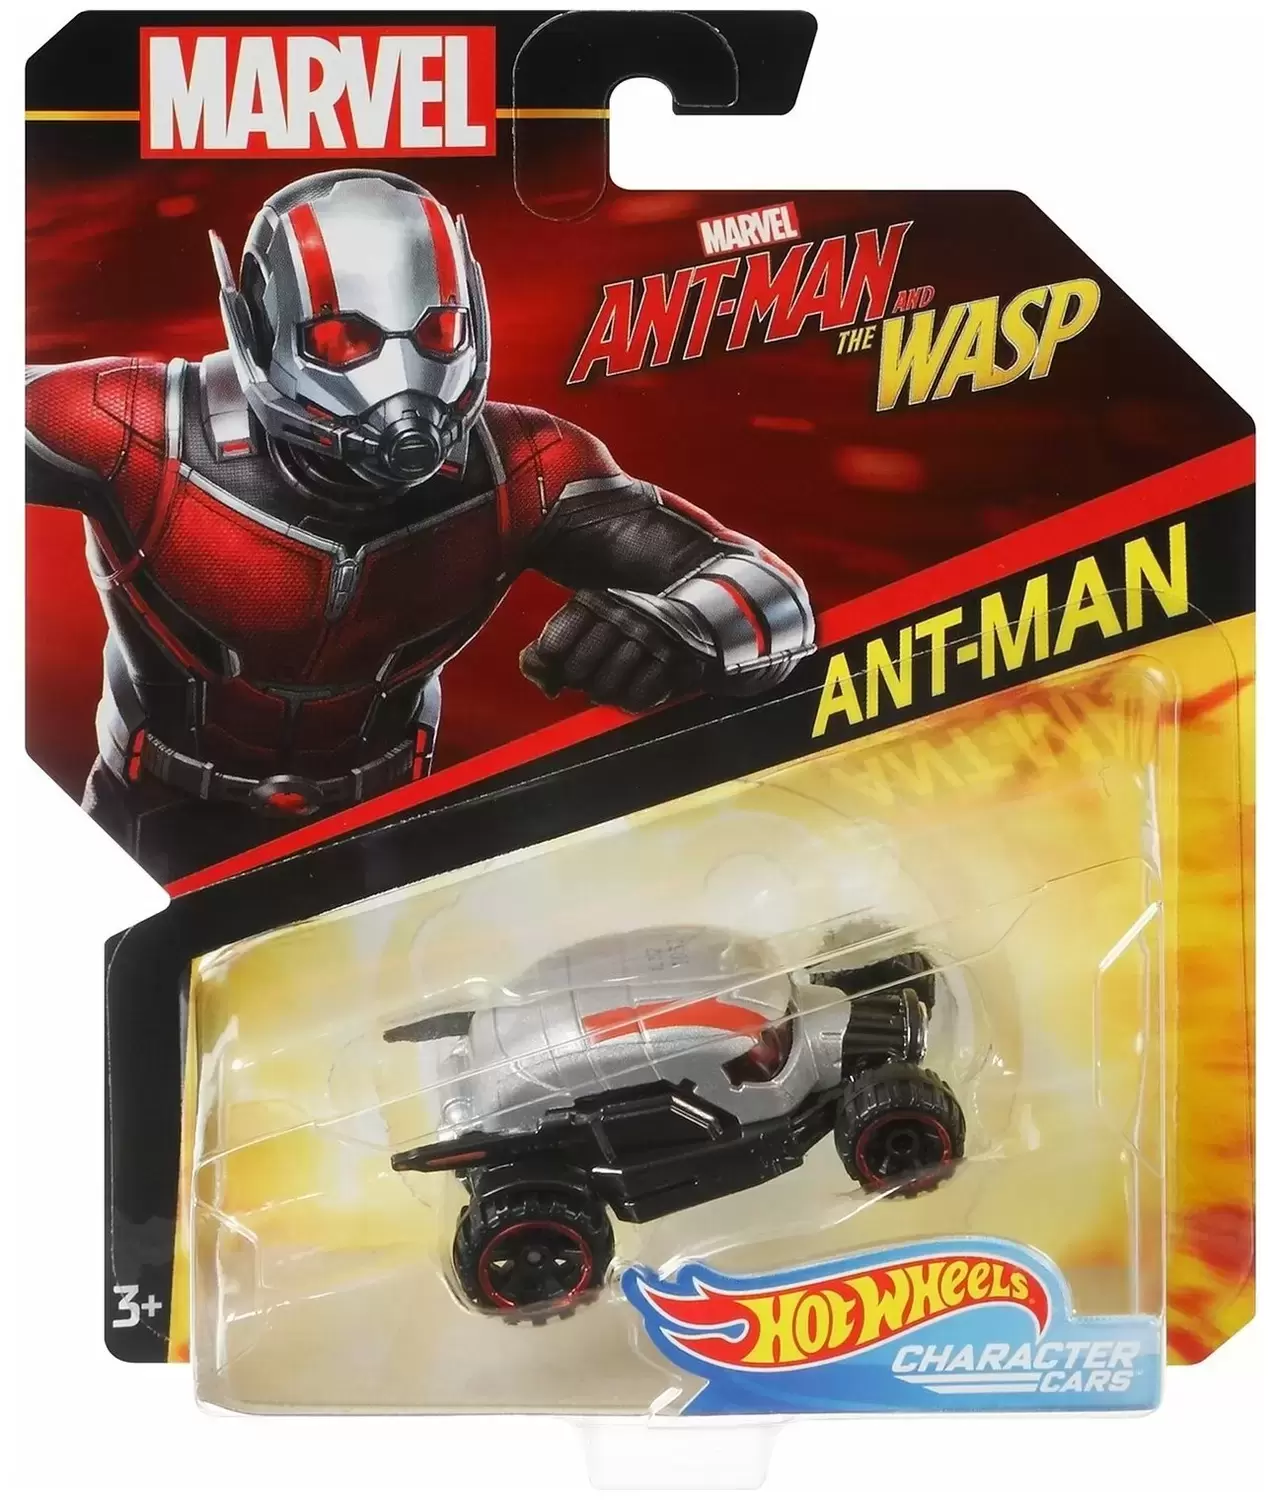 Marvel Character Cars - Ant-Man & The Wasp - Ant-Man